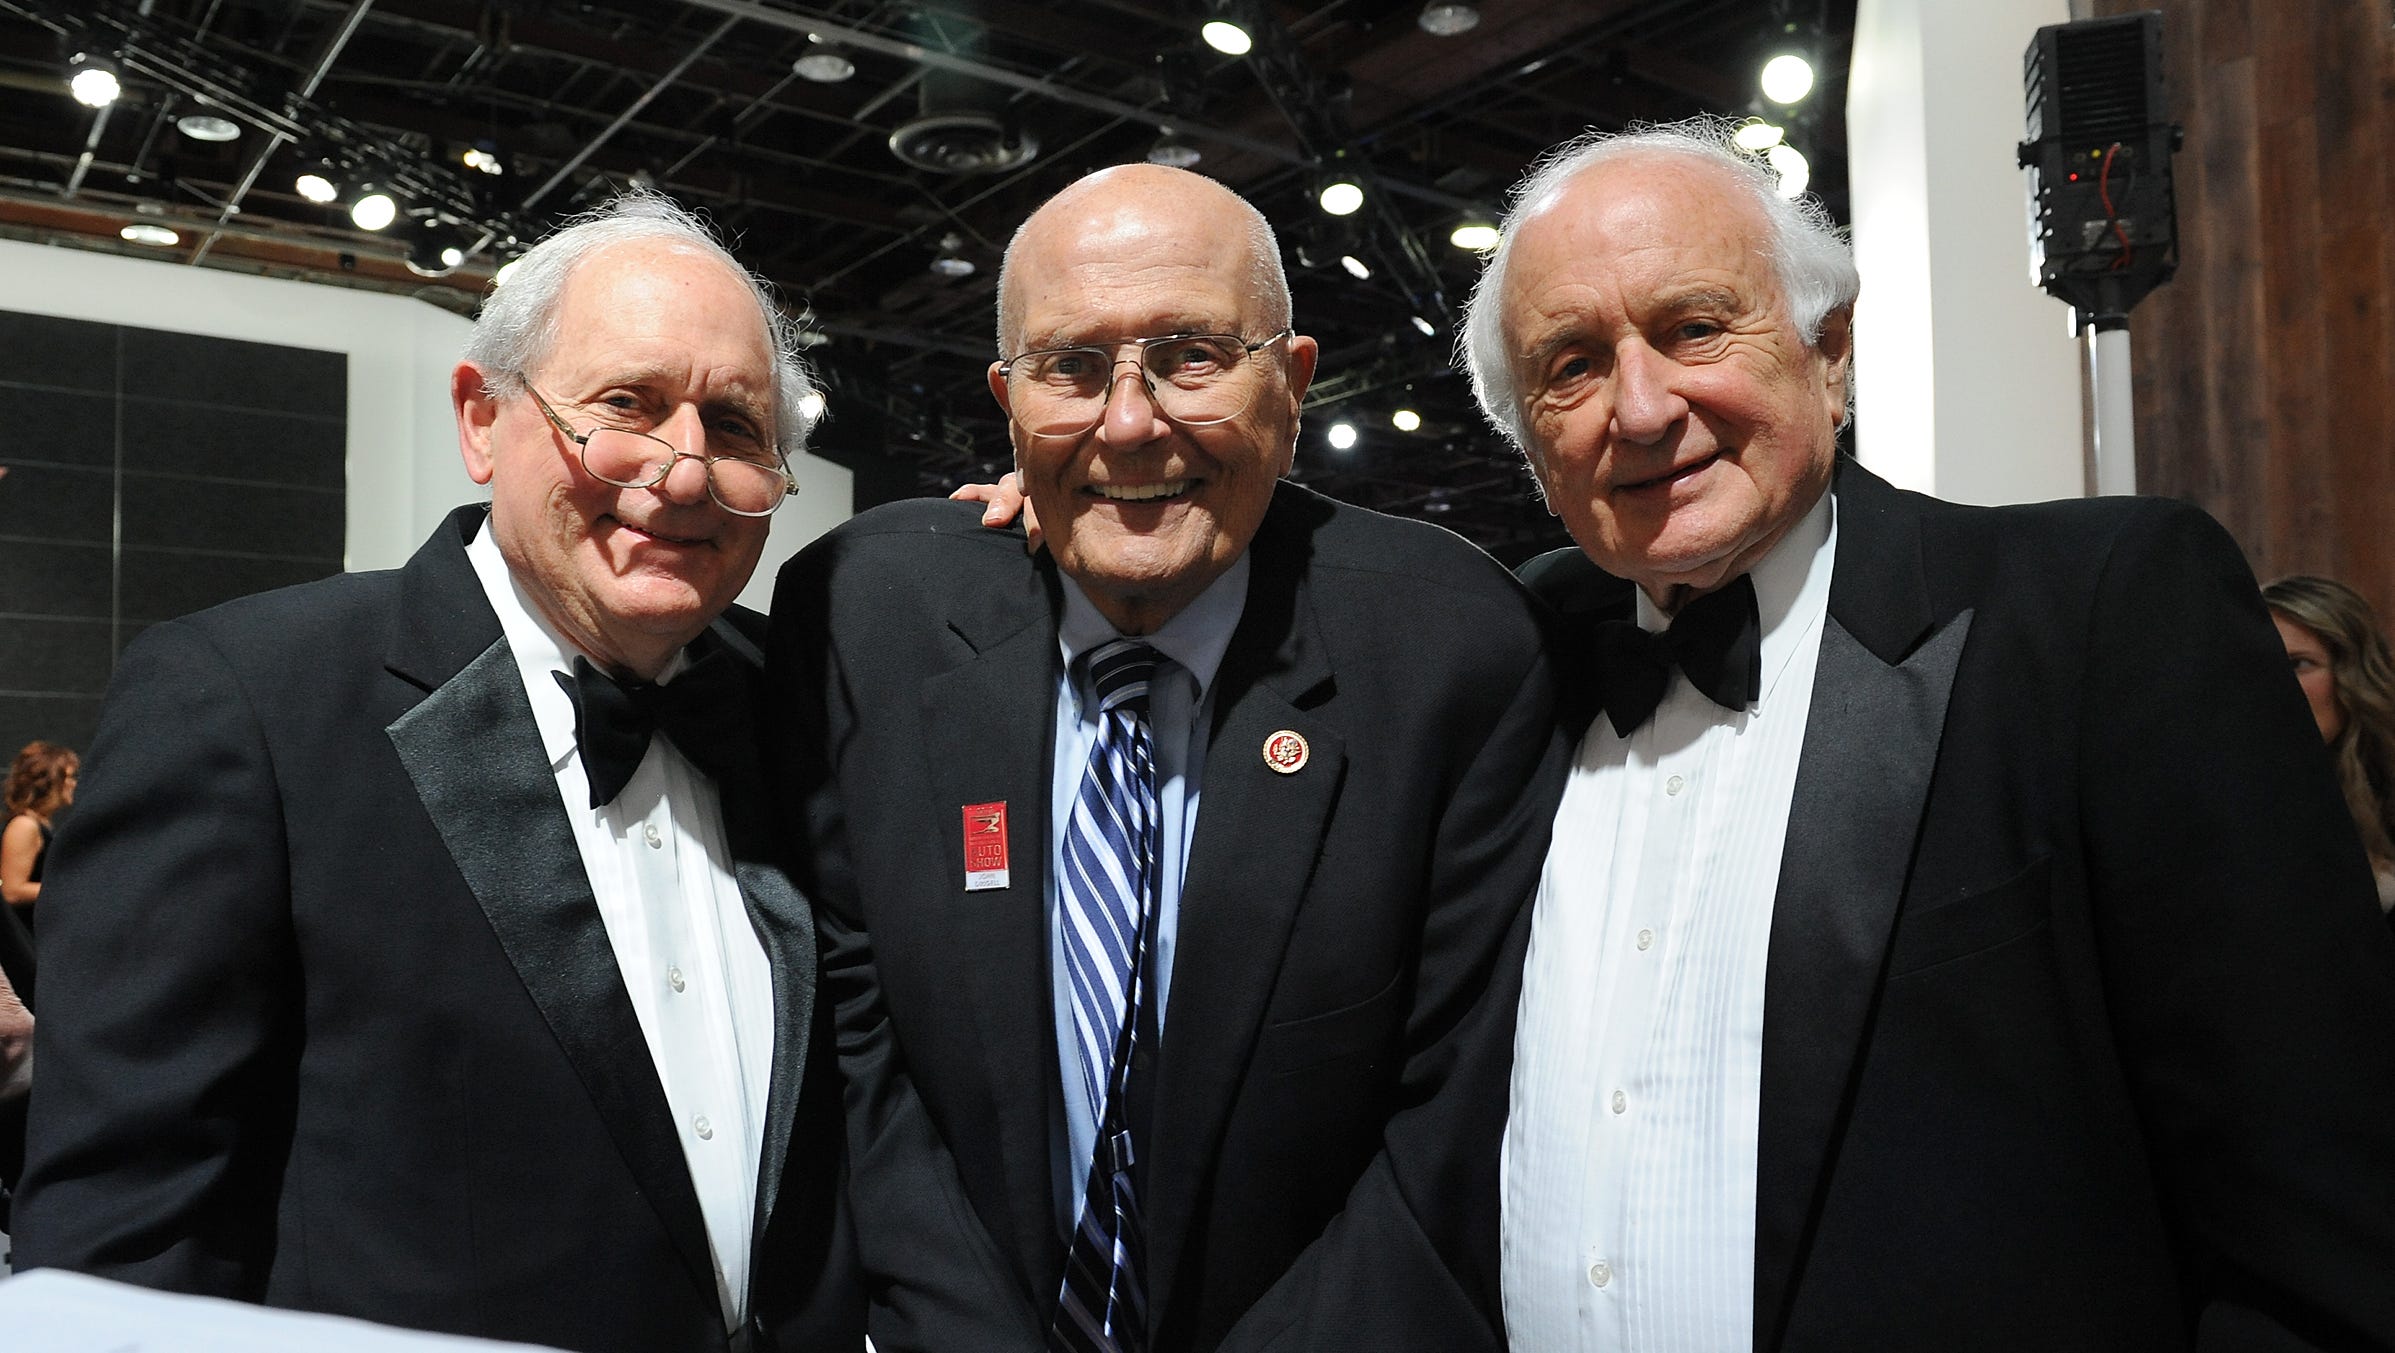 U.S. Sen. Carl Levin,  is joined by U.S. Rep. John Dingell, D-Dearborn, and U.S. Rep. Sander Levin, D-Royal Oak, at the Charity Preview for the North American International Auto Show at Cobo Center Friday, Jan. 18, 2013.